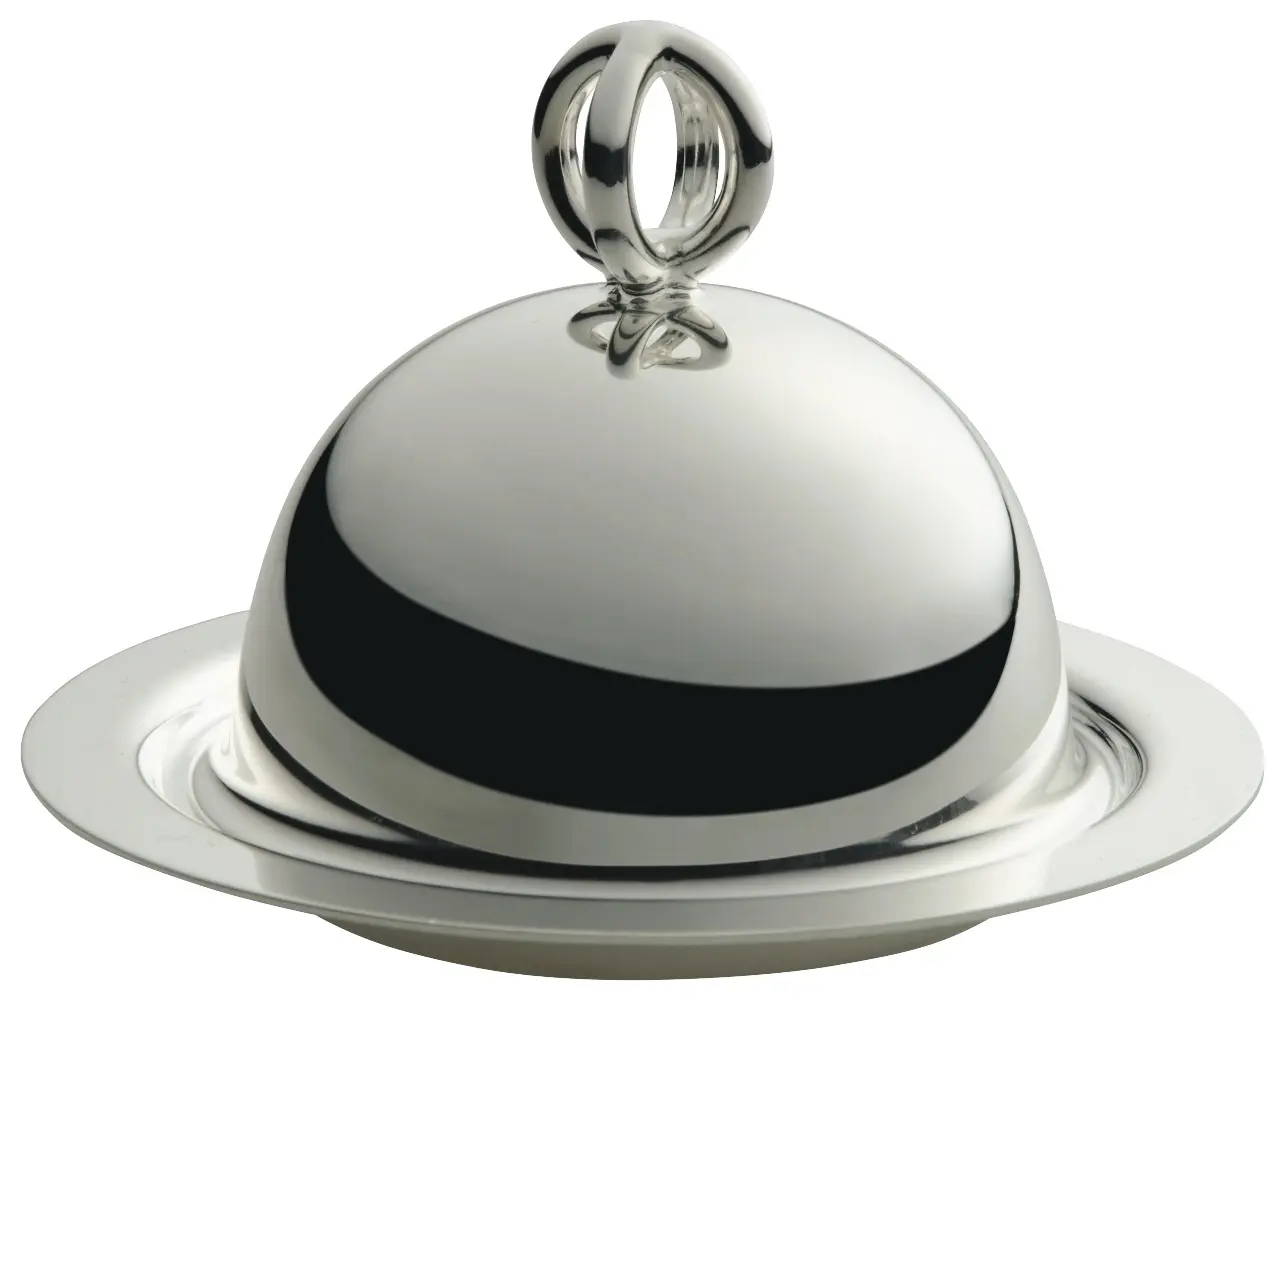 Rounded Shape Stainless Steel Butter Dish Shiny Polished Finishing Butter Container Dish With Lid Rounded Shape For Best Quality